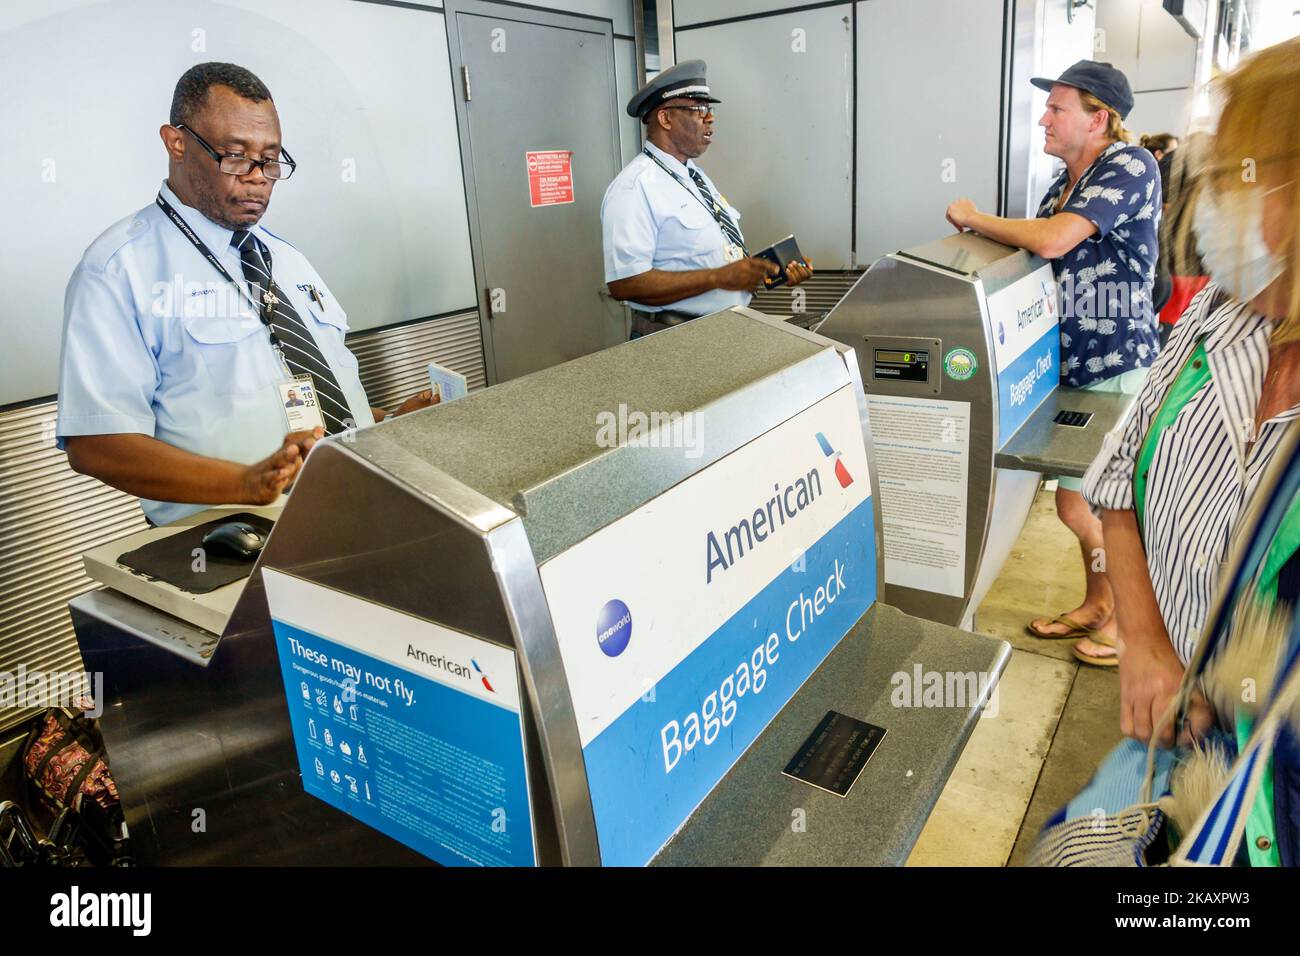 Miami Florida,Miami International Airport MIA terminal,American Airlines Black skycap curbside baggage check,employee employees worker workers working Stock Photo